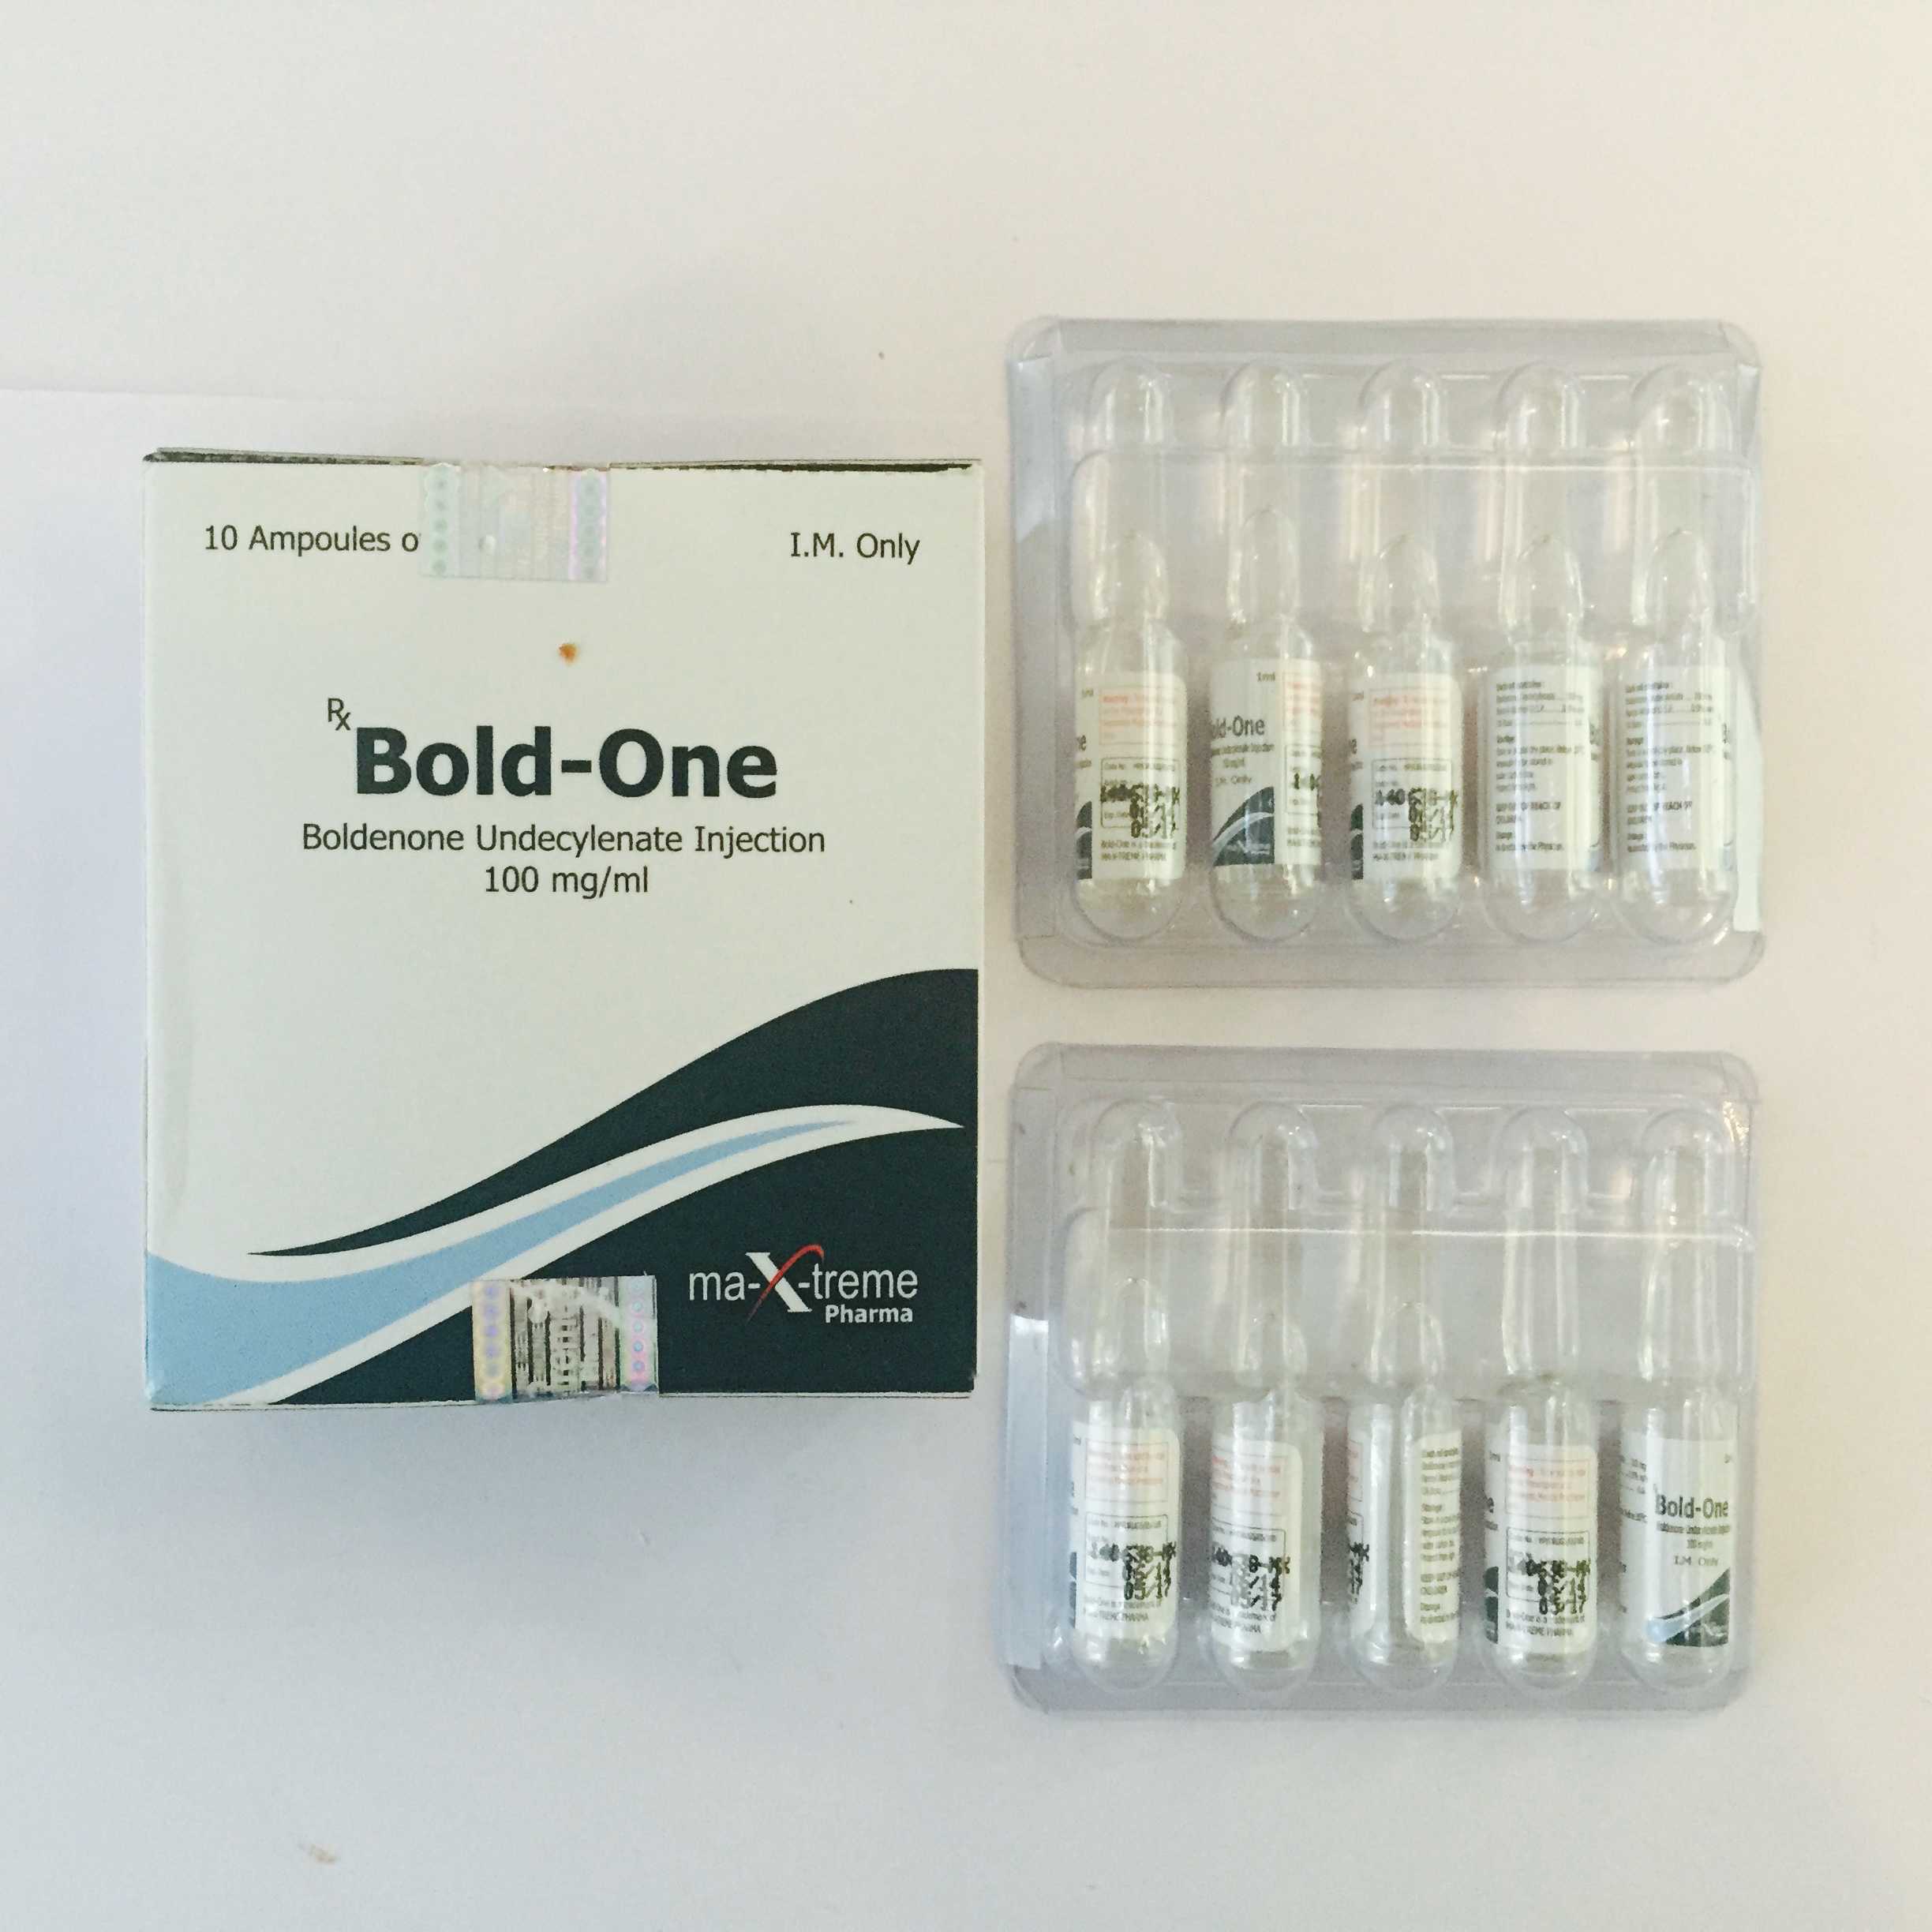 Unlike some harsh anabolic steroids, Boldenone undecylenate is mild yet effective in promoting muscular definition, improving strength, and boosting endurance. Its anabolic rating is slightly higher than testosterone, while its androgenic rating is much lower. This means you can expect impressive gains without having to worry about acne, baldness, prostate issues, or other complications.